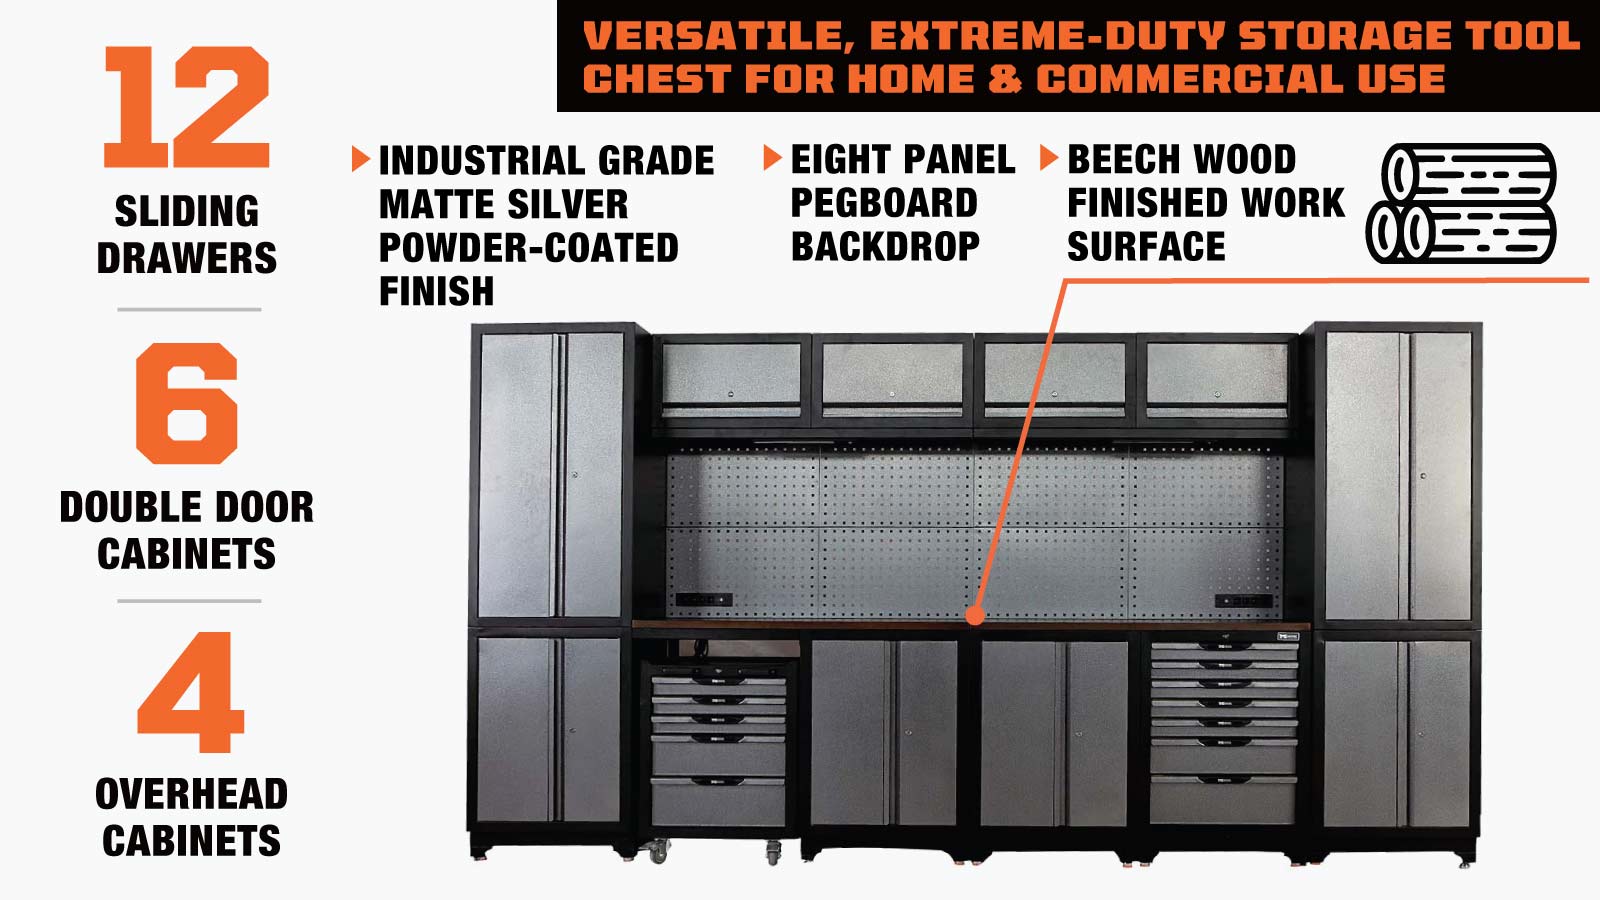 TMG Industrial 12’ Extreme-Duty Steel Garage Tool Chest w/Pegboard, Power Outlets, USB Port, Magnetic Motion LED Lamps, Cabinets & Roll-Out Tool Chest, TMG-WBM12-description-image